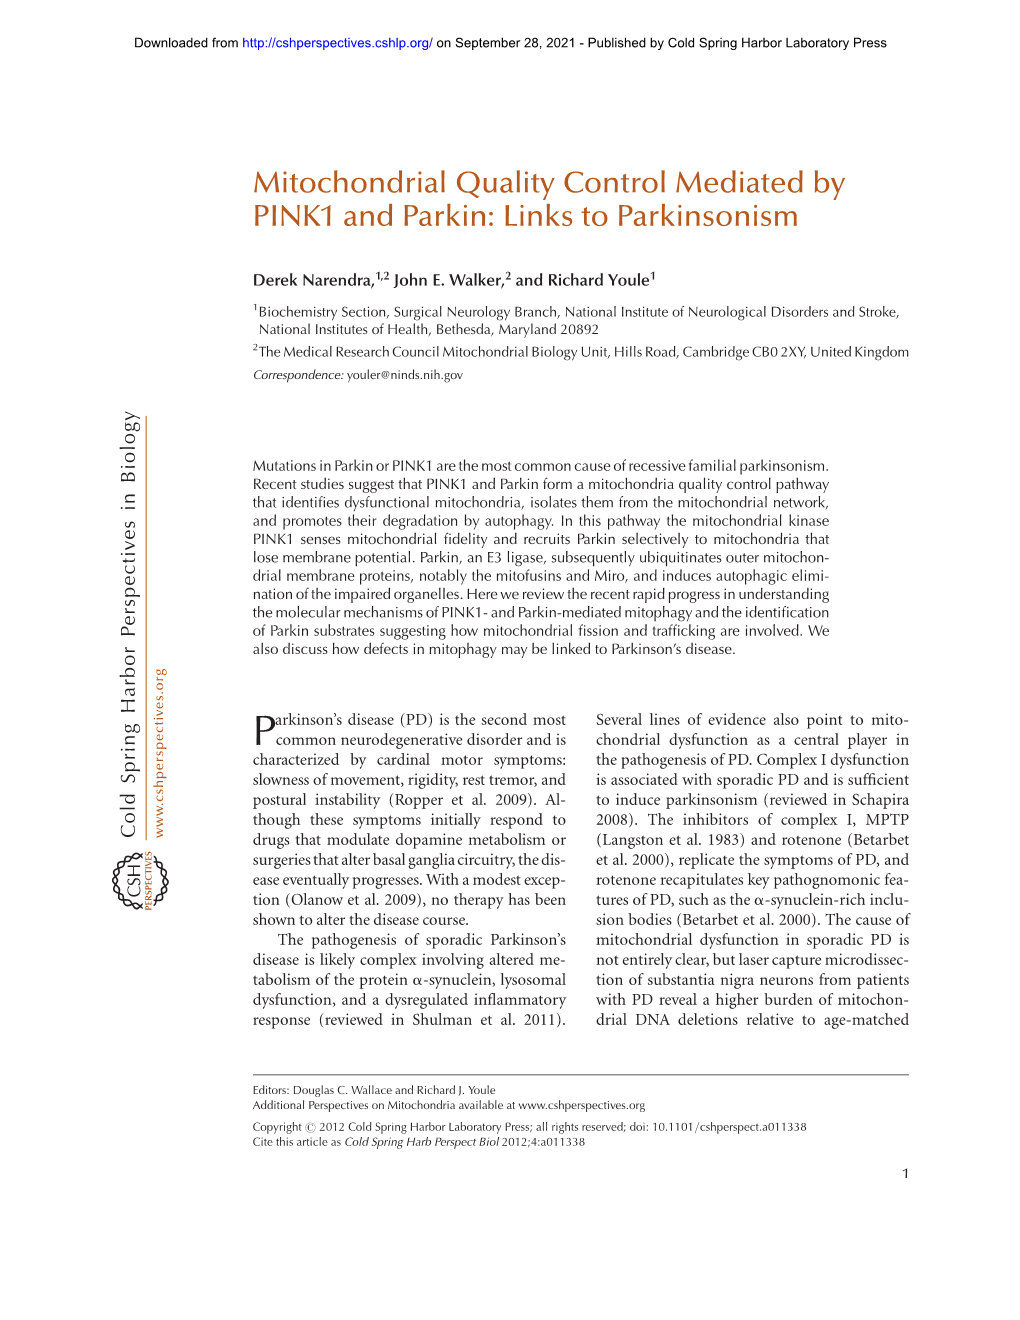 Mitochondrial Quality Control Mediated by PINK1 and Parkin: Links to Parkinsonism